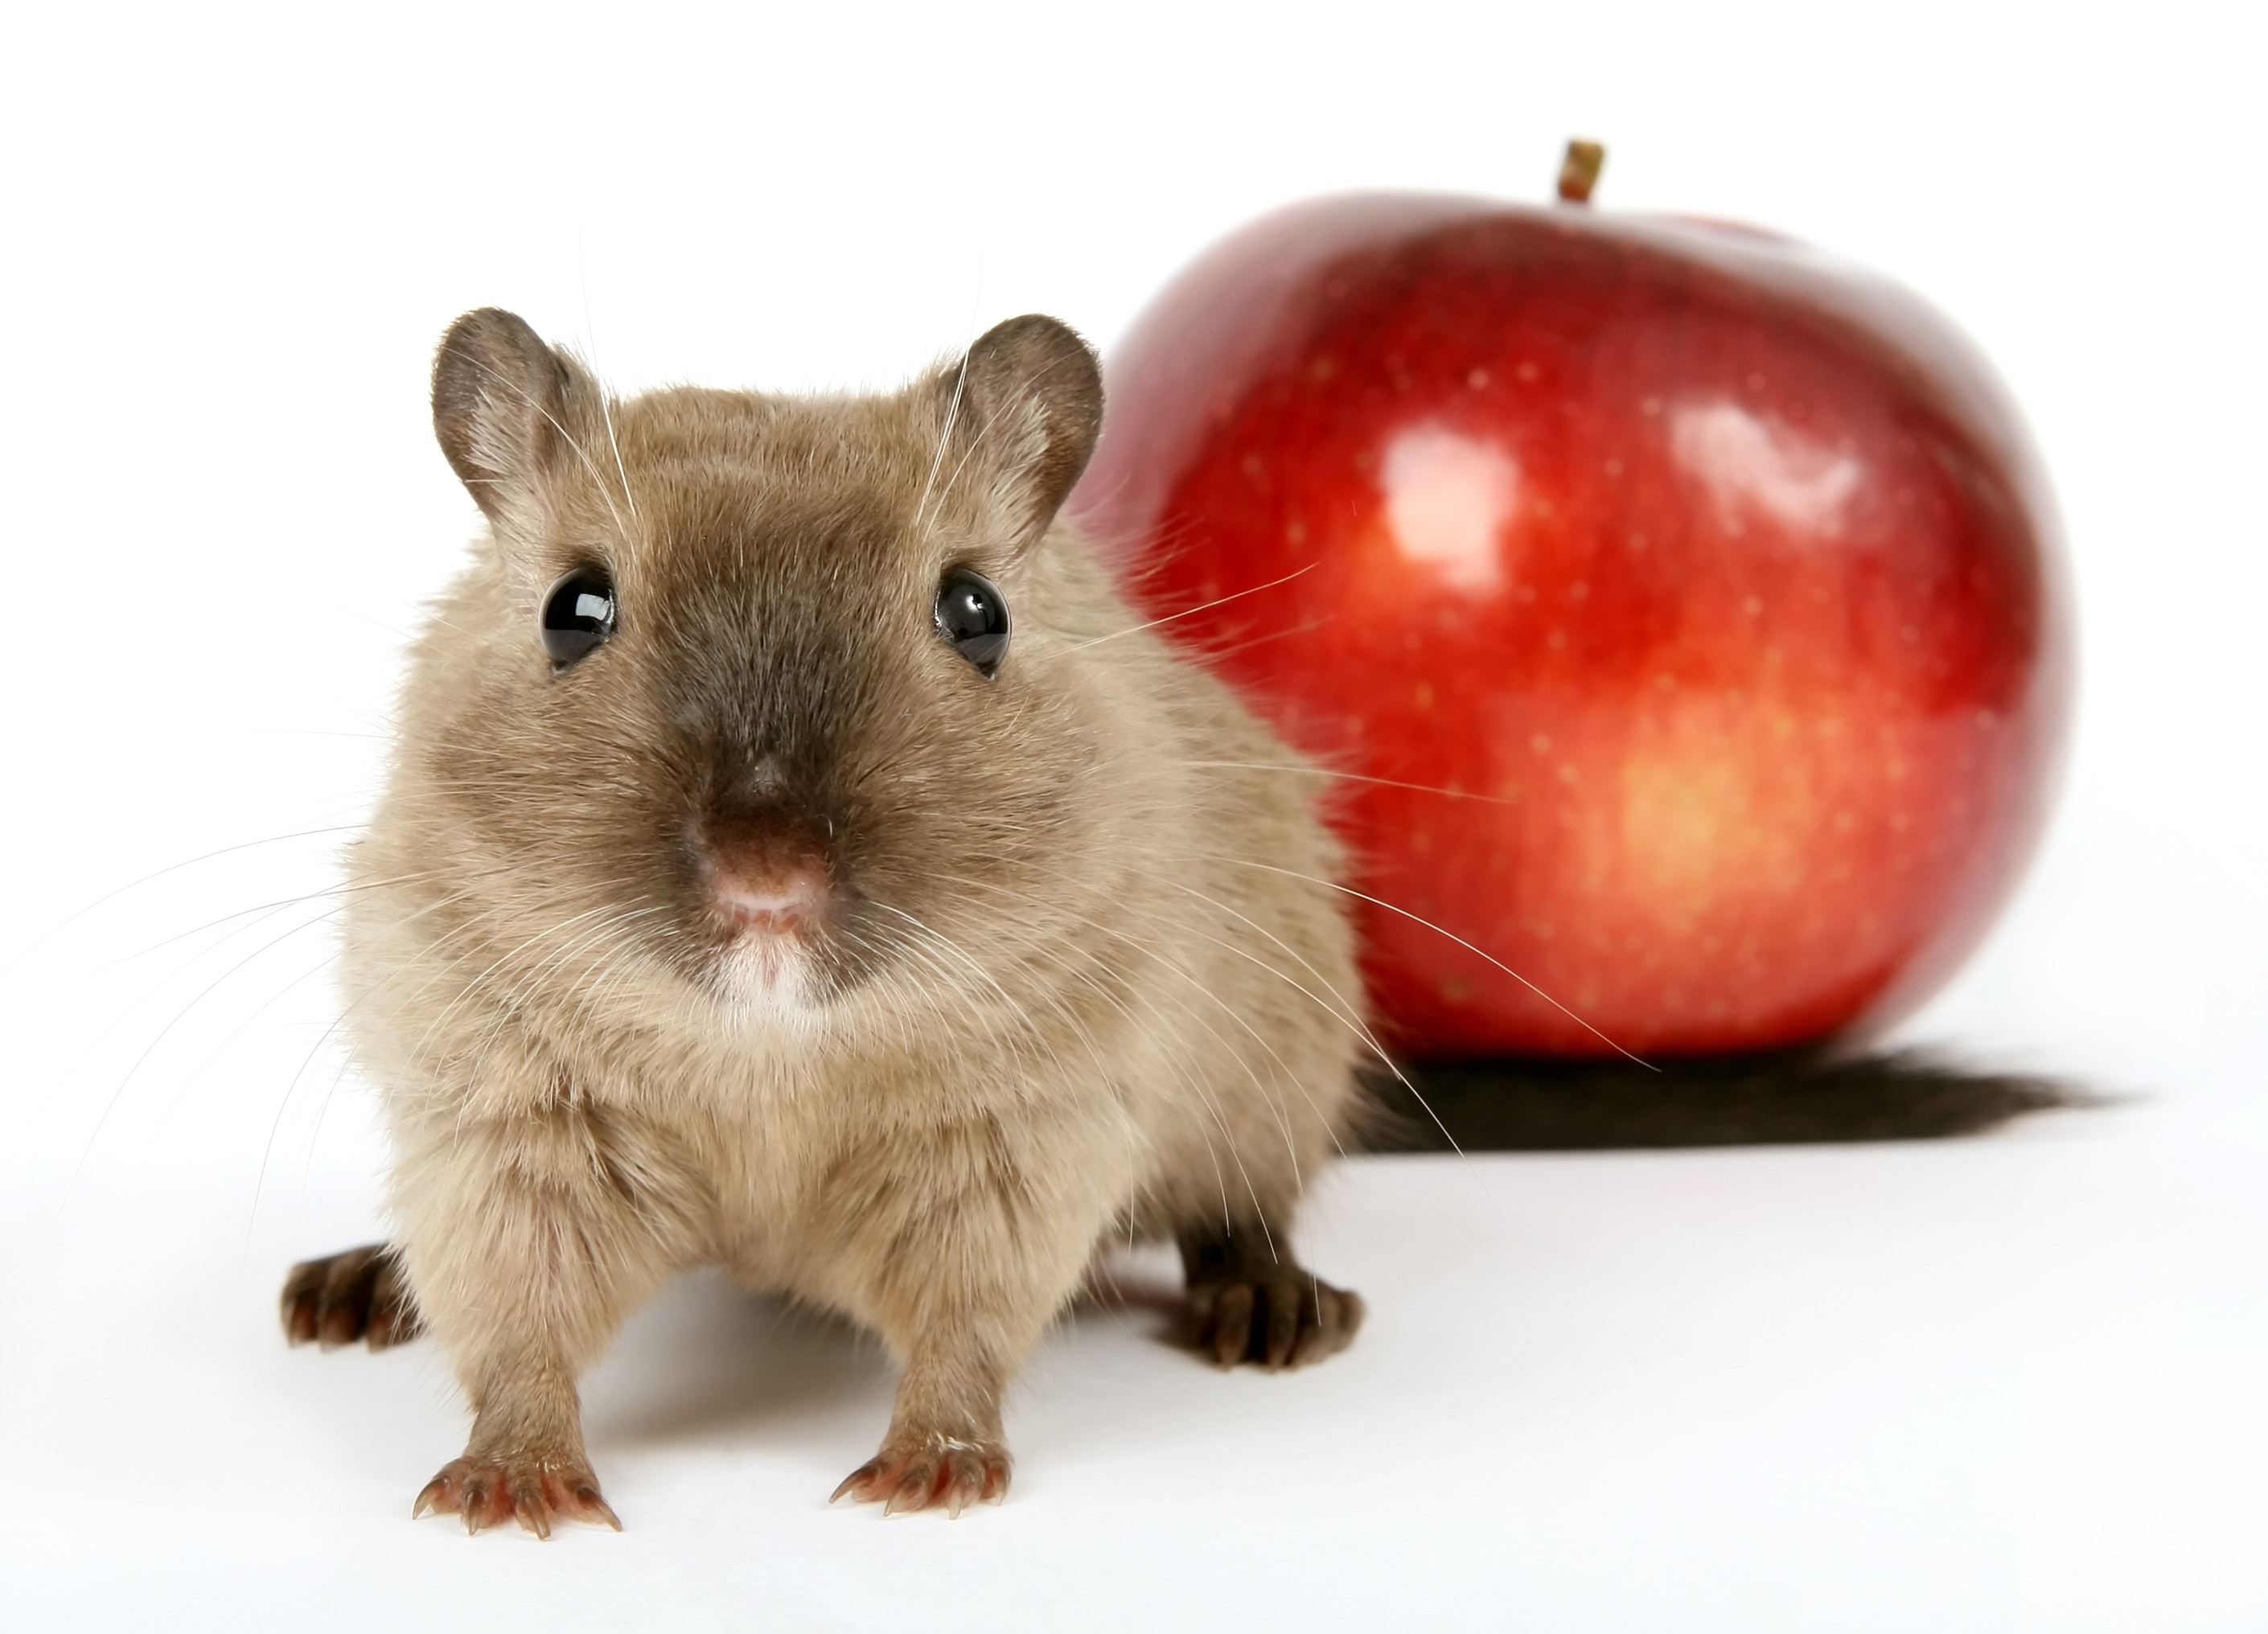 brown mice and red apple fruit